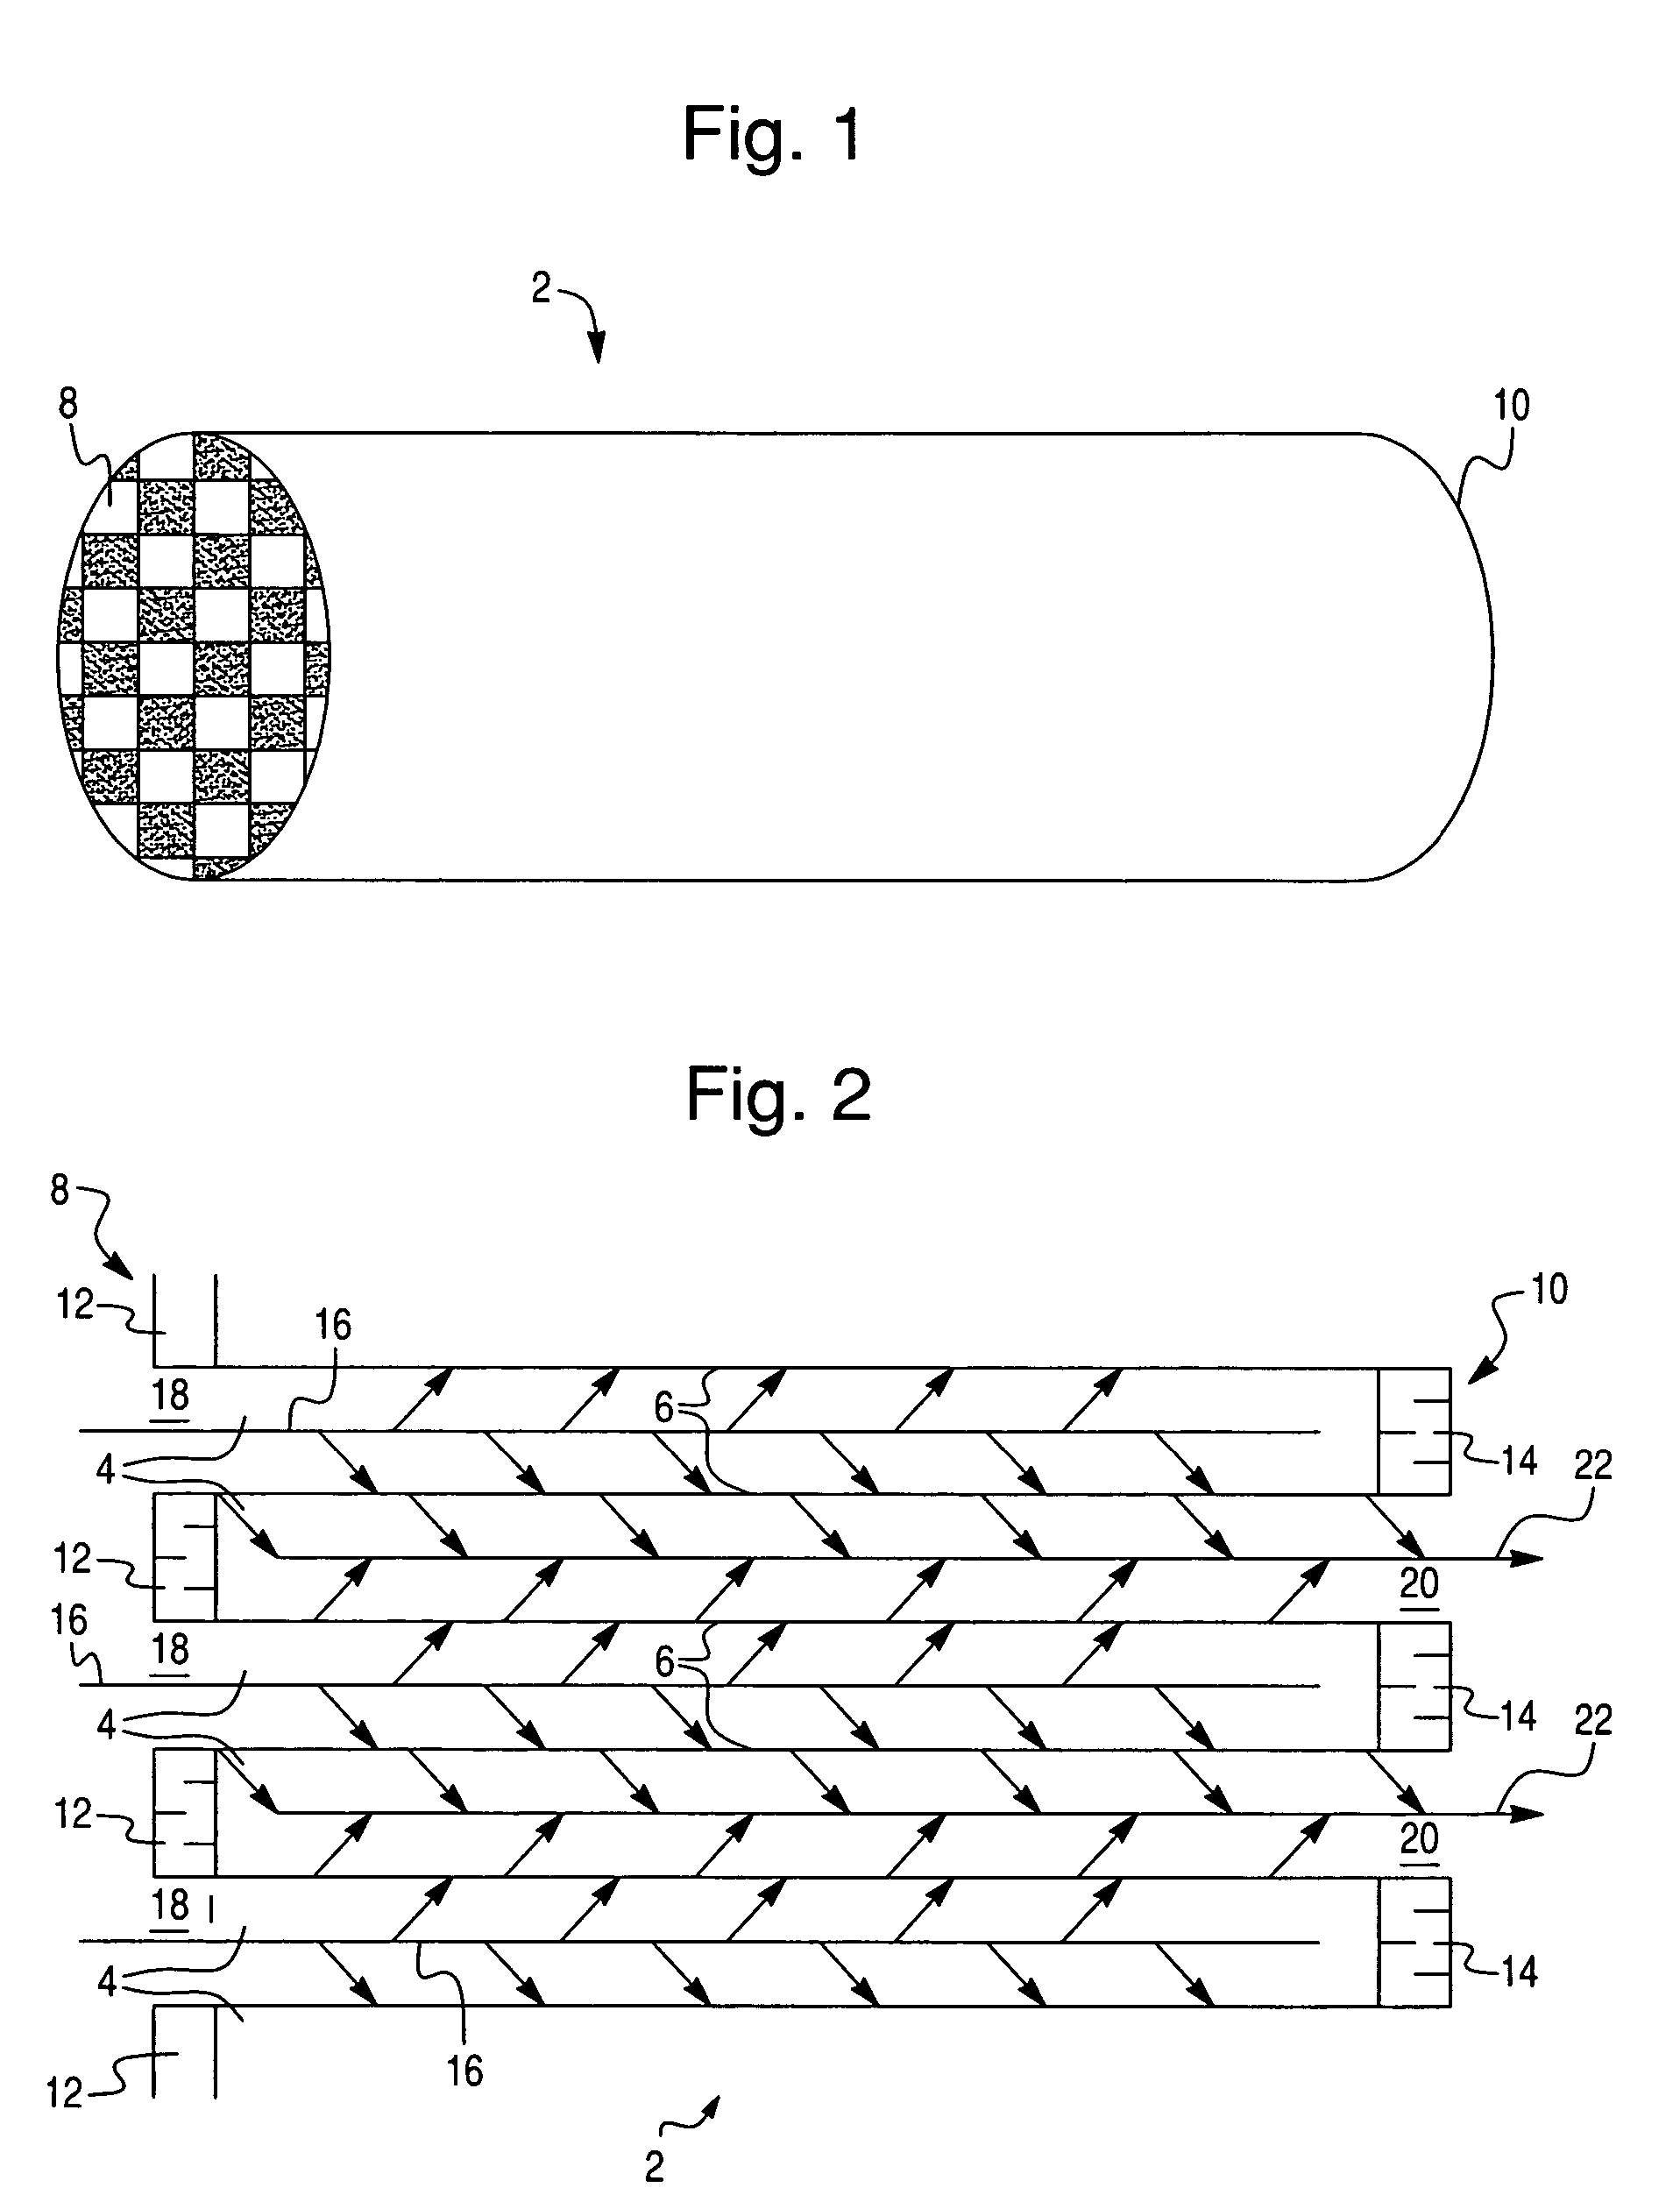 Diesel particulate filters having ultra-thin catalyzed oxidation coatings